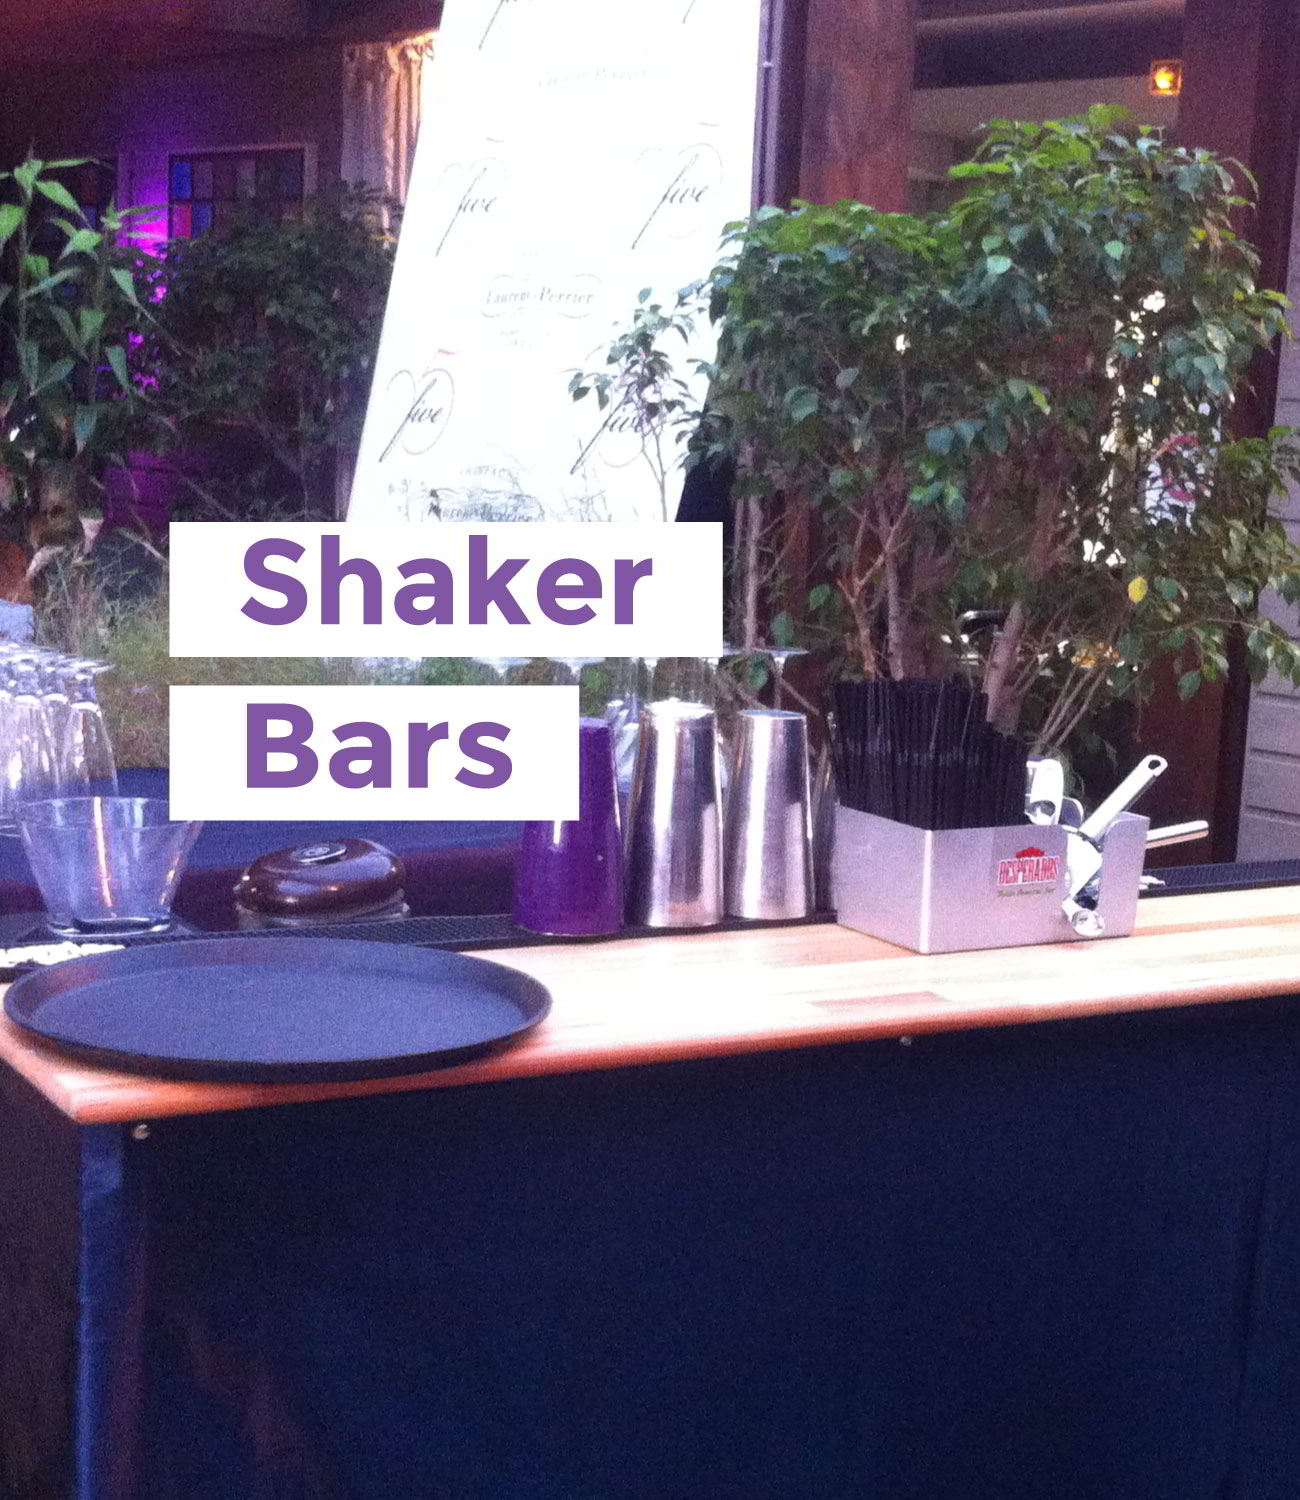 One of shakers bars